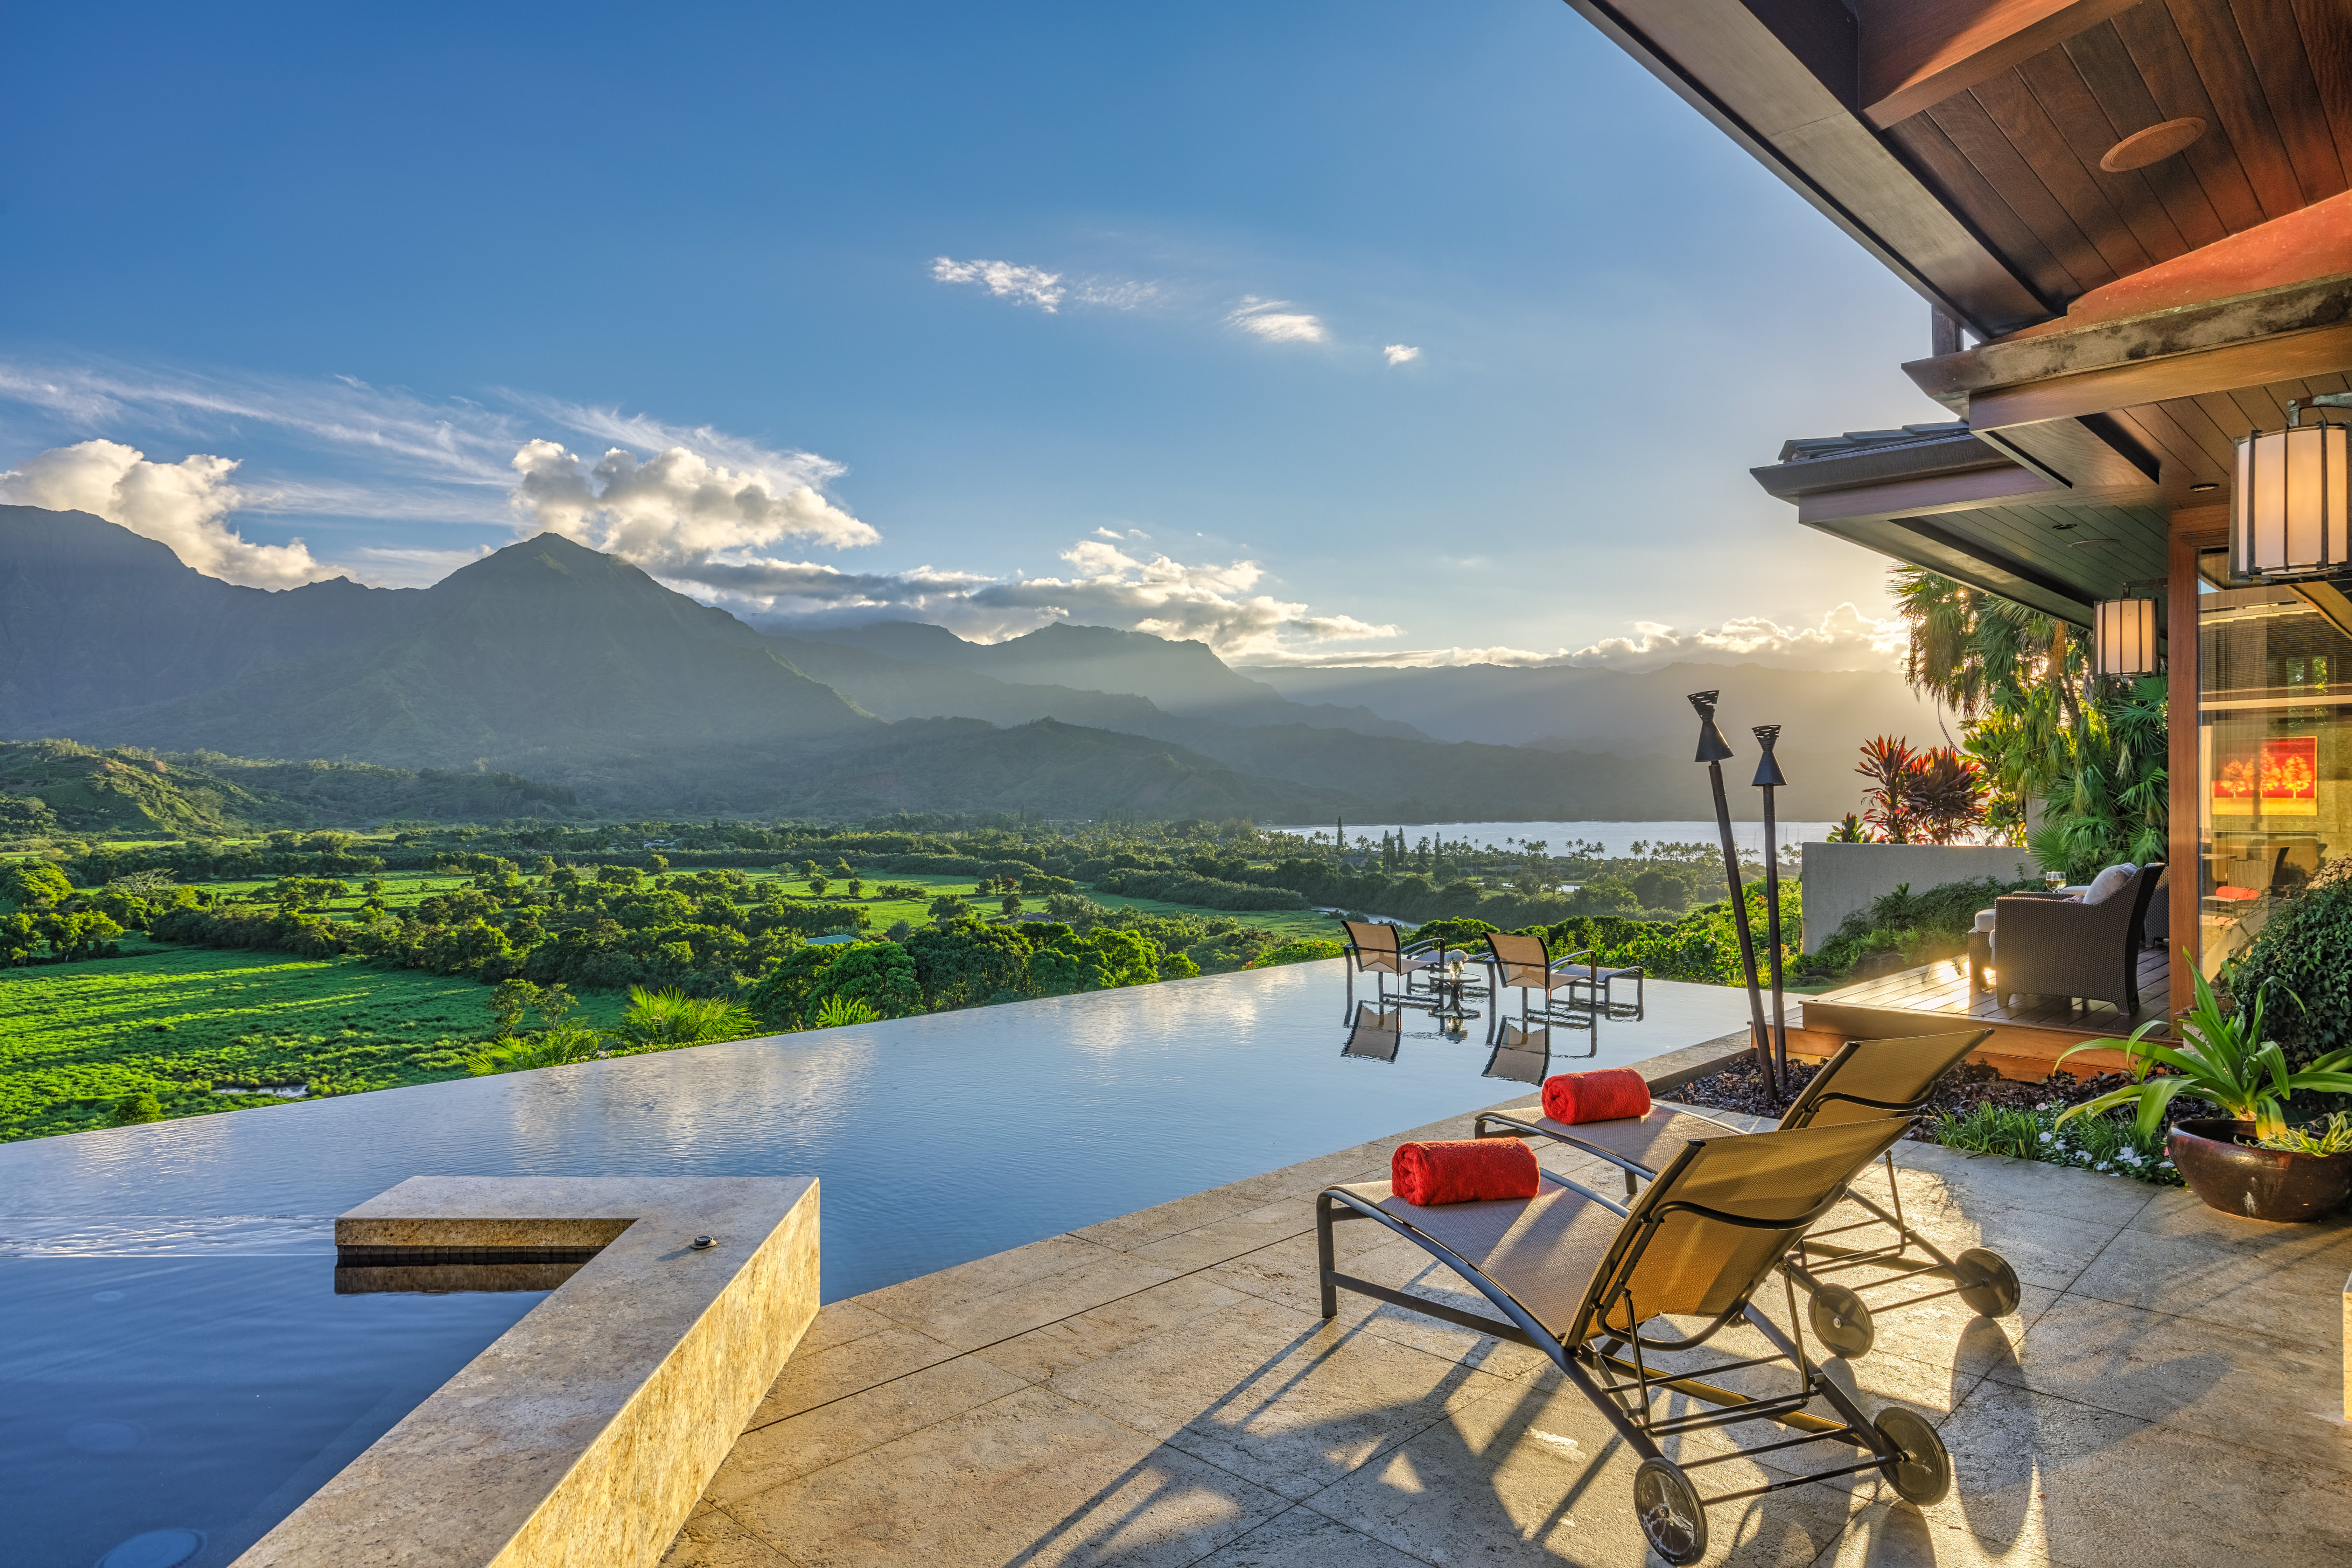 Hawaii’s ultra-luxury real estate market smashes records, as sales soar 600%. Here’s what’s selling